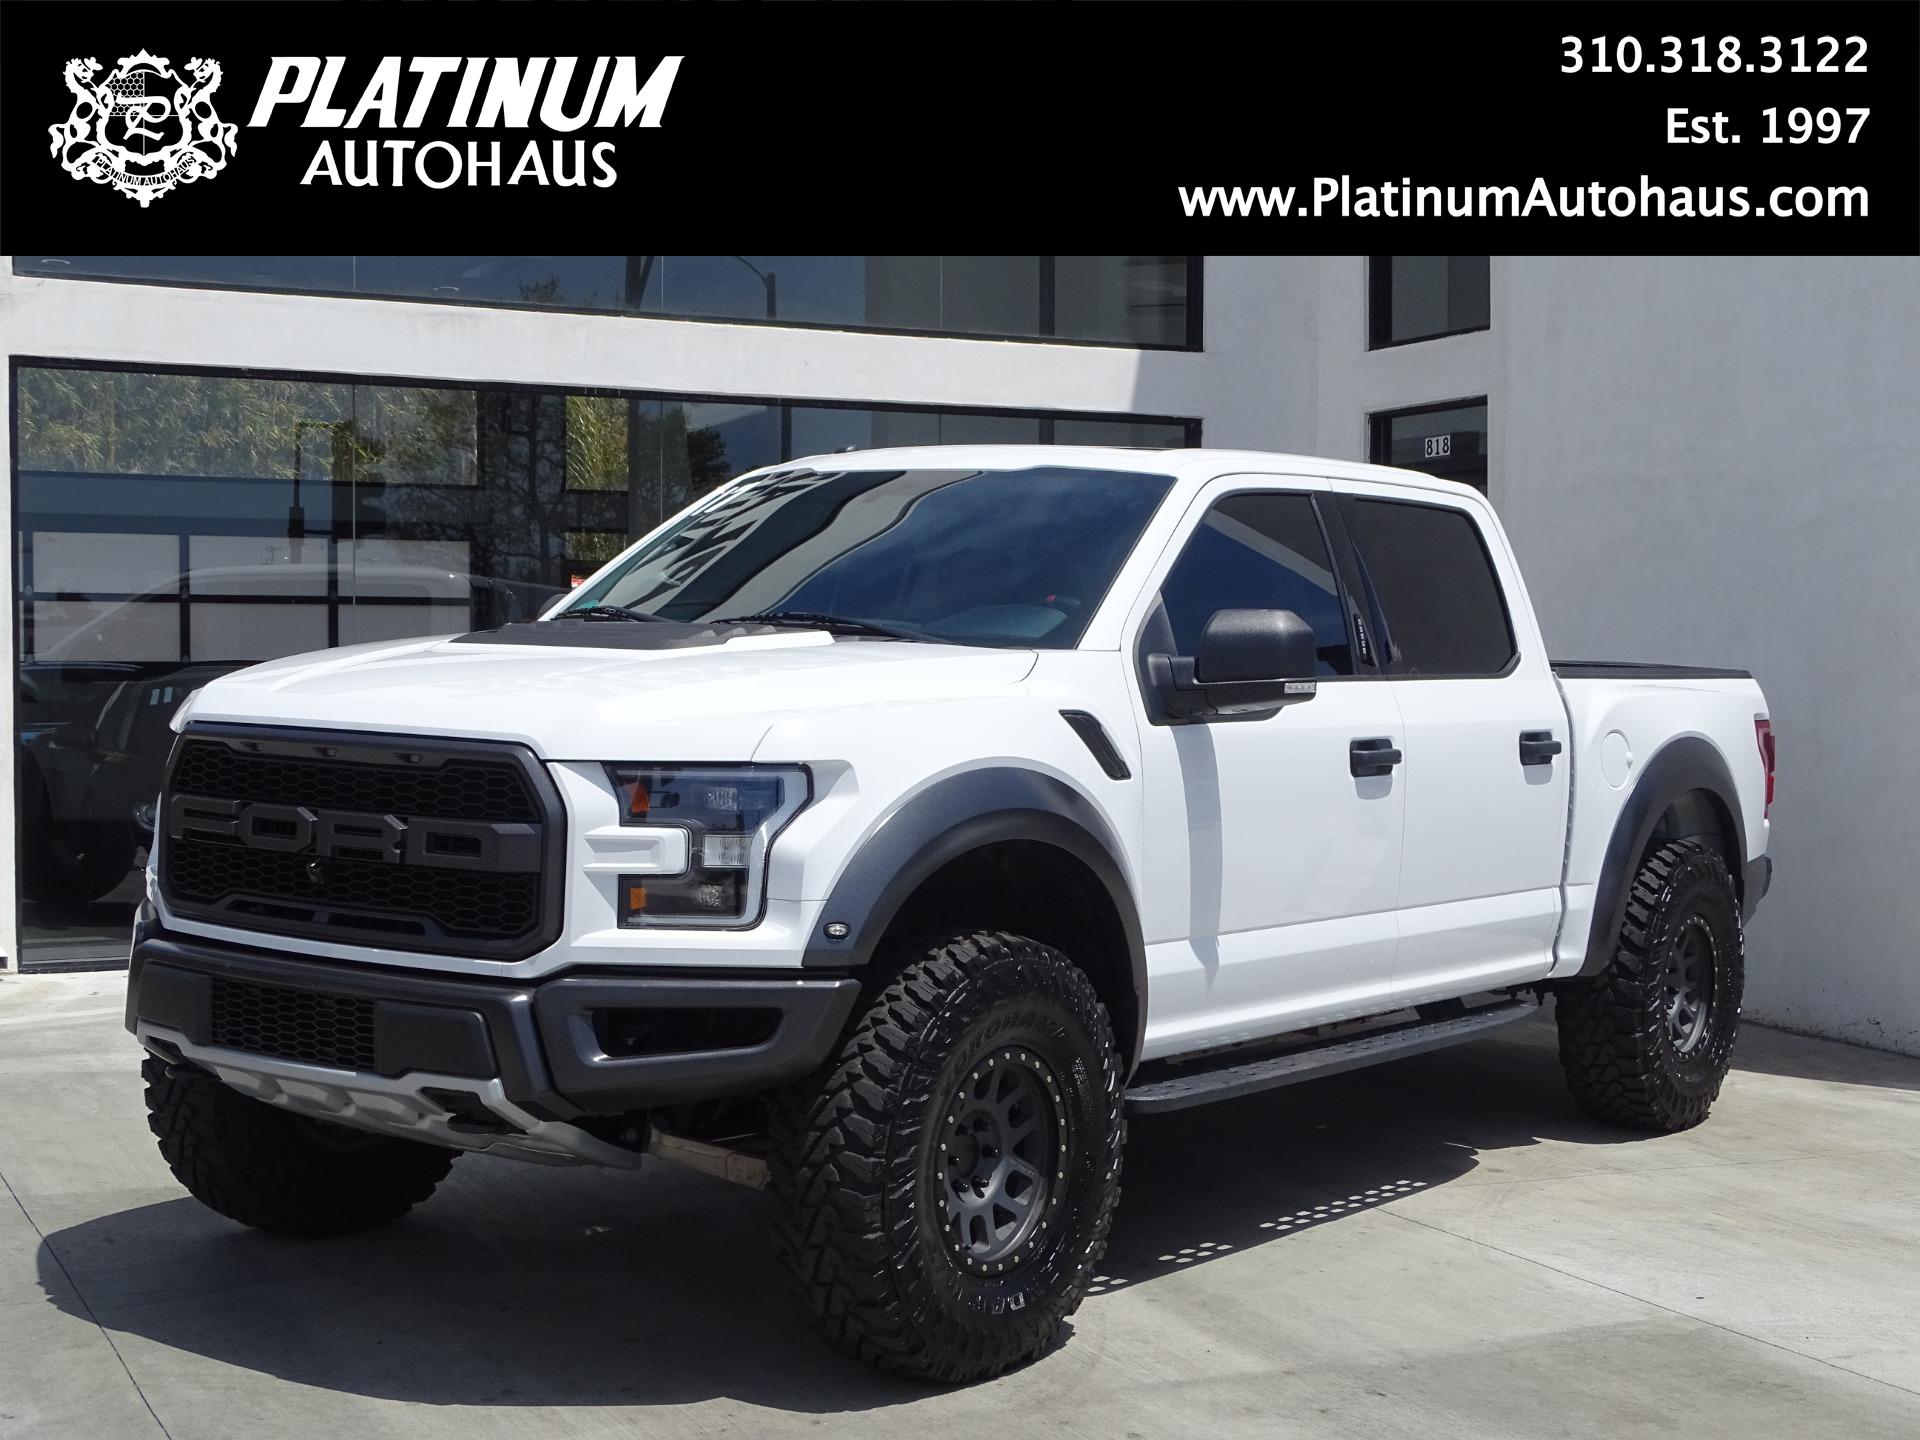 ford raptor for sale near me